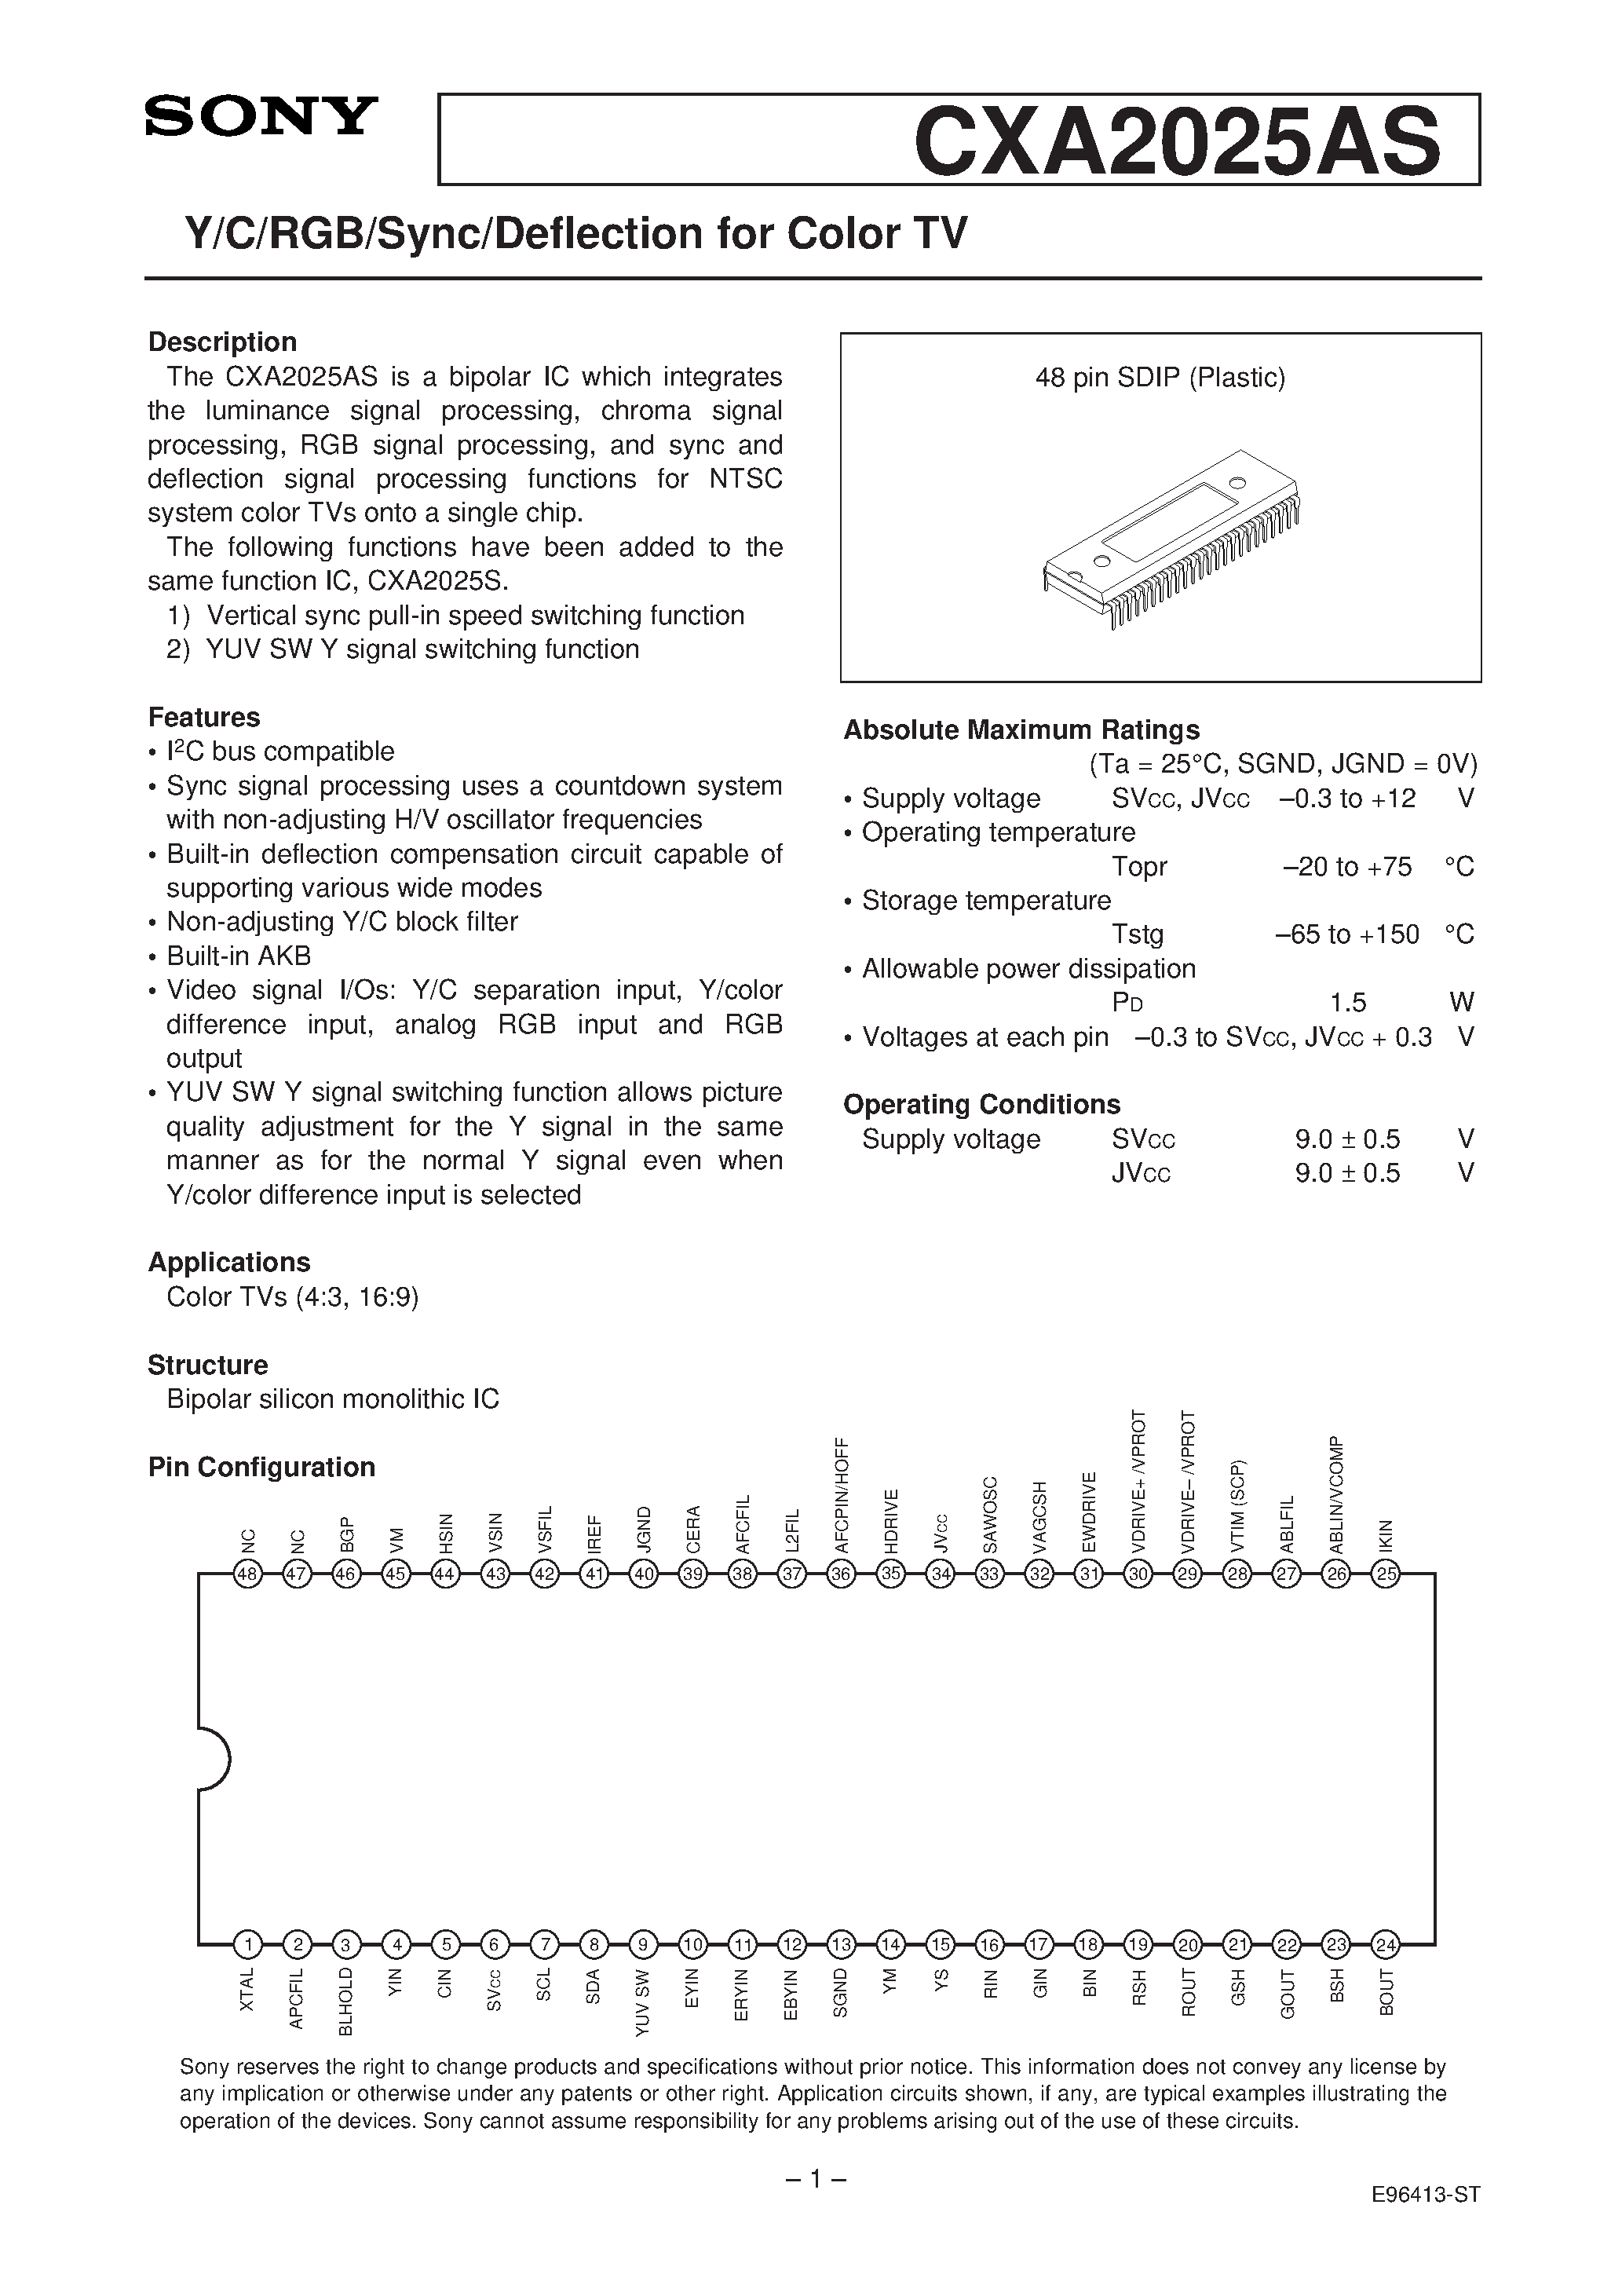 Datasheet CXA2025 - Y/C/RGB/Sync/Deflection for Color TV page 1